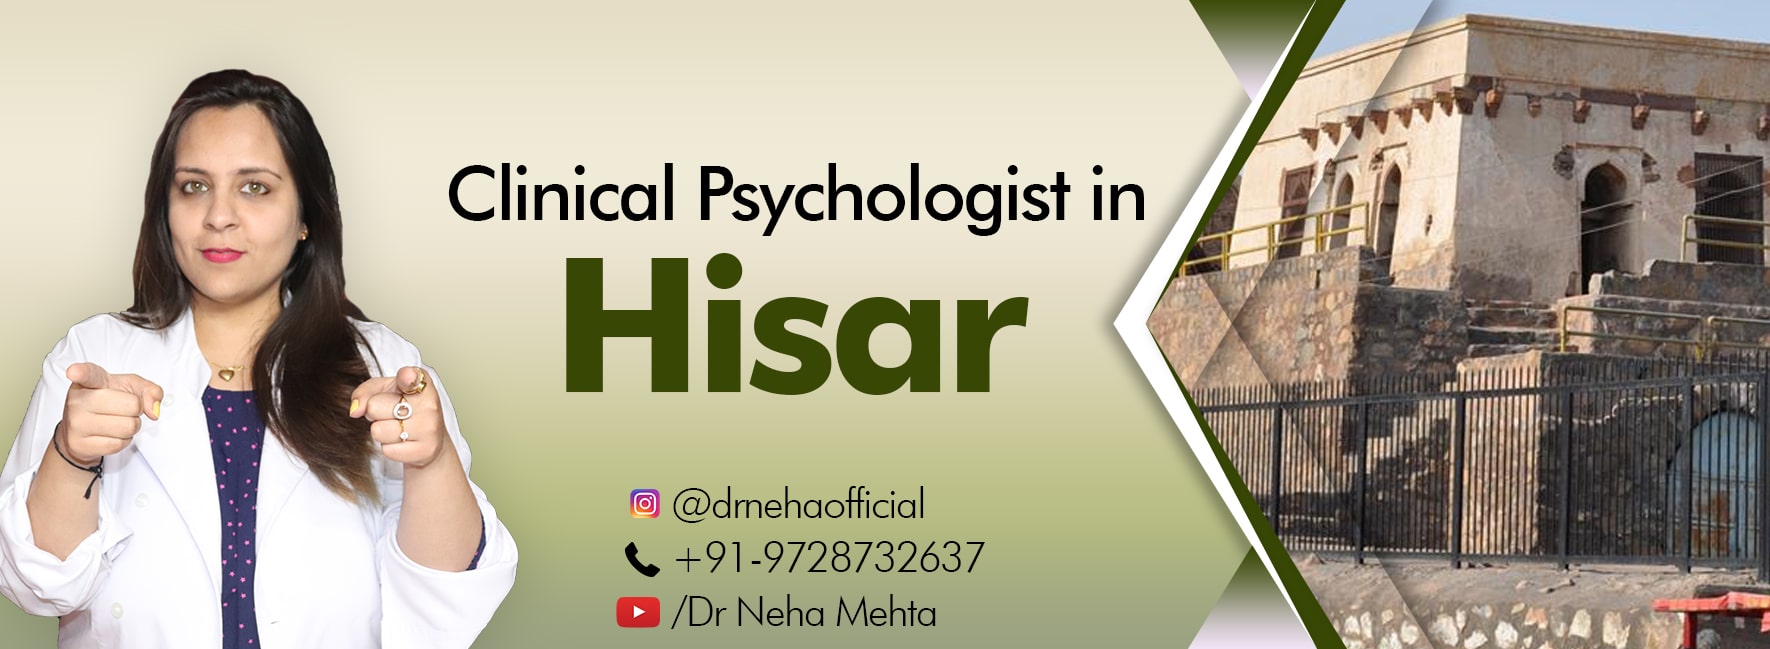 clinical-psychologist-in-hisar